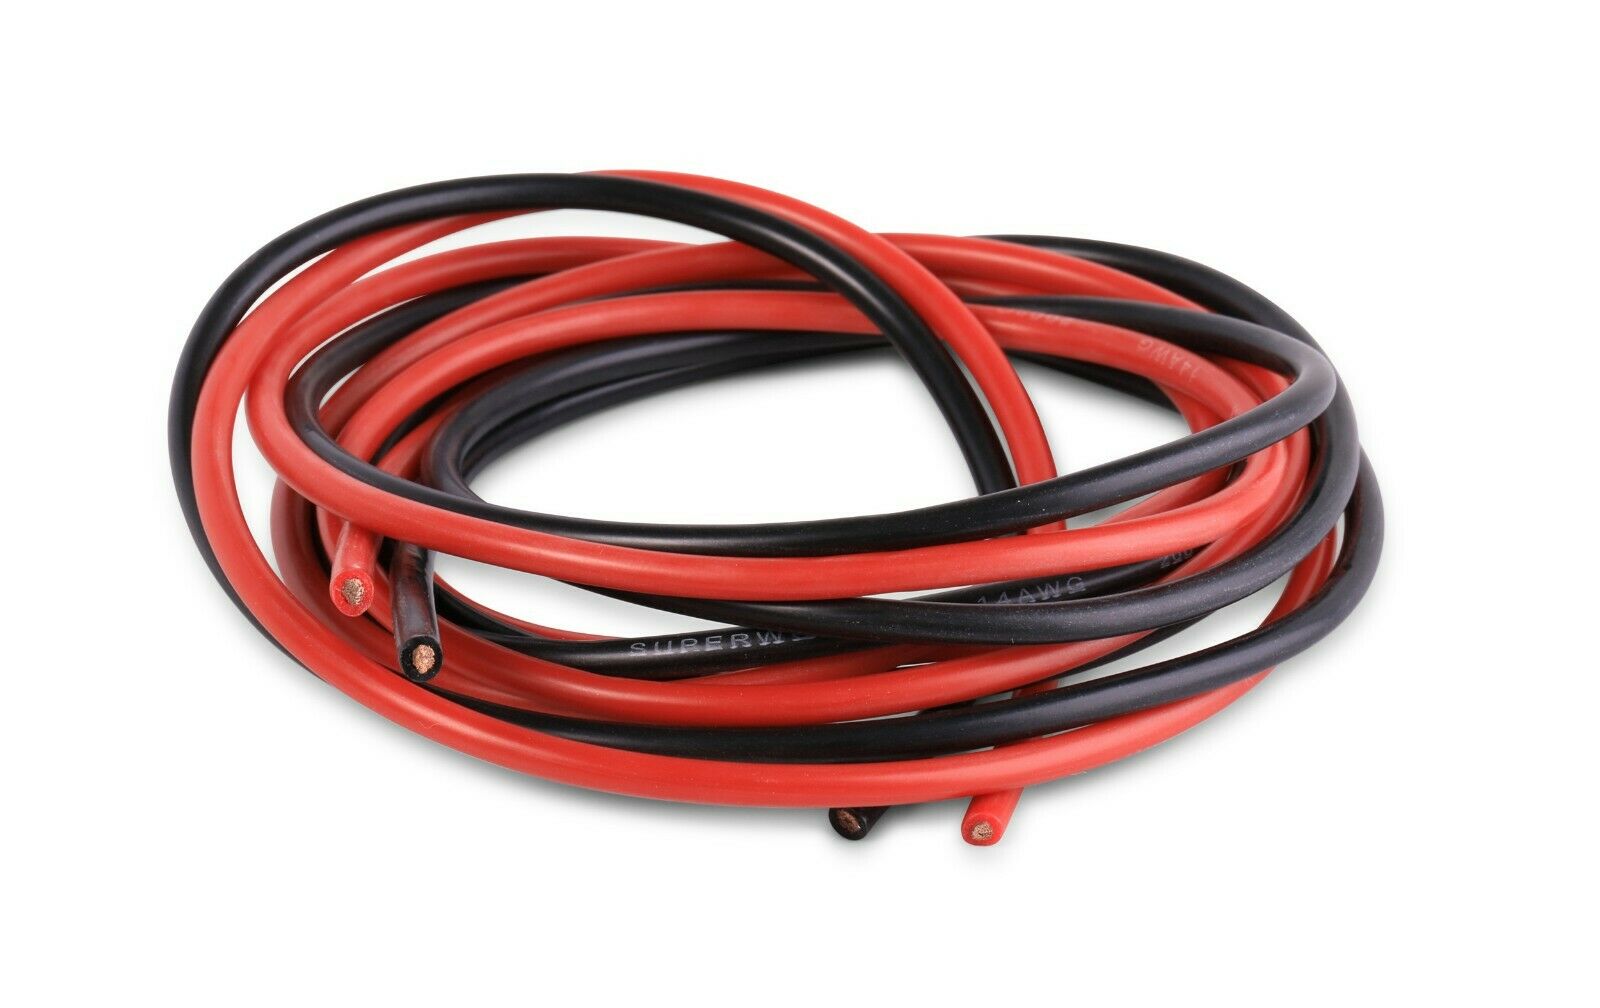 14 Gauge Silicone Wire 10 Feet - 14 Awg Silicone Wire - Flexible Silicone Wire